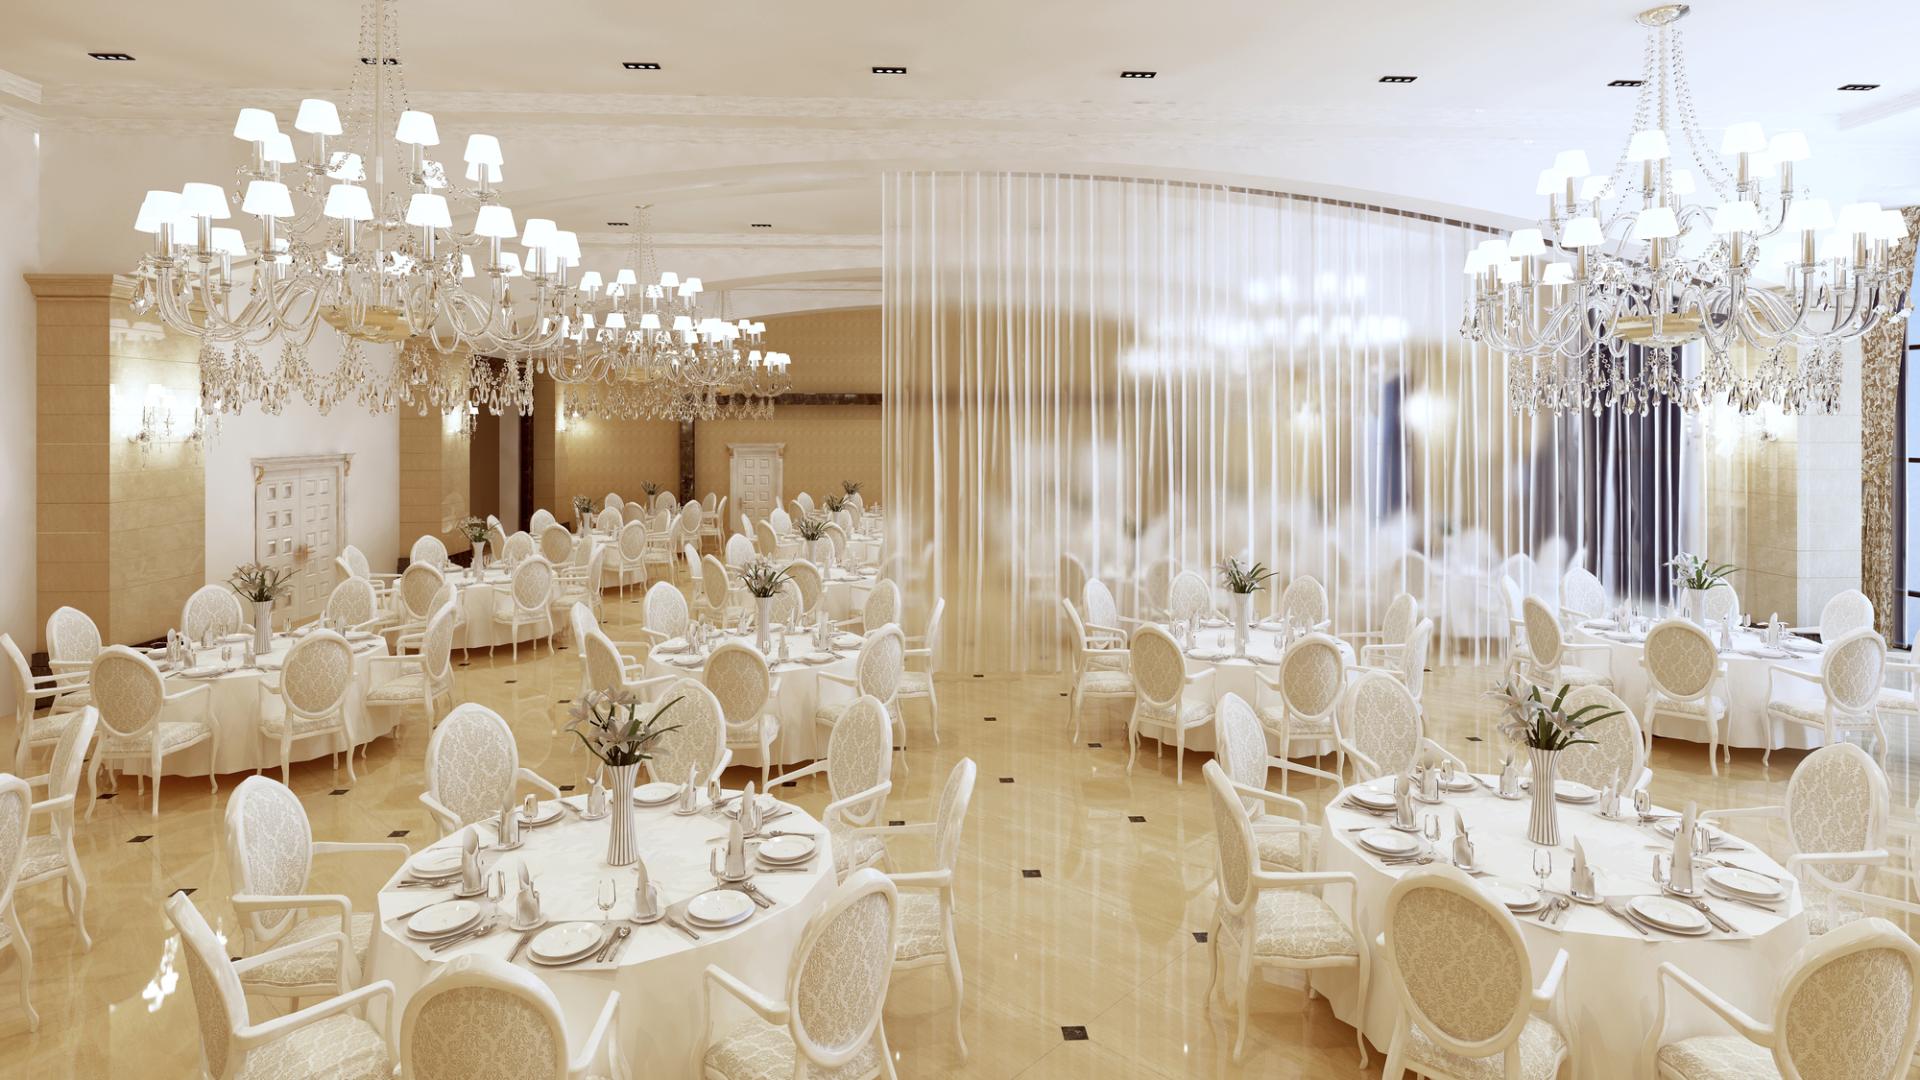 Banquet Halls for Hire in Sydney